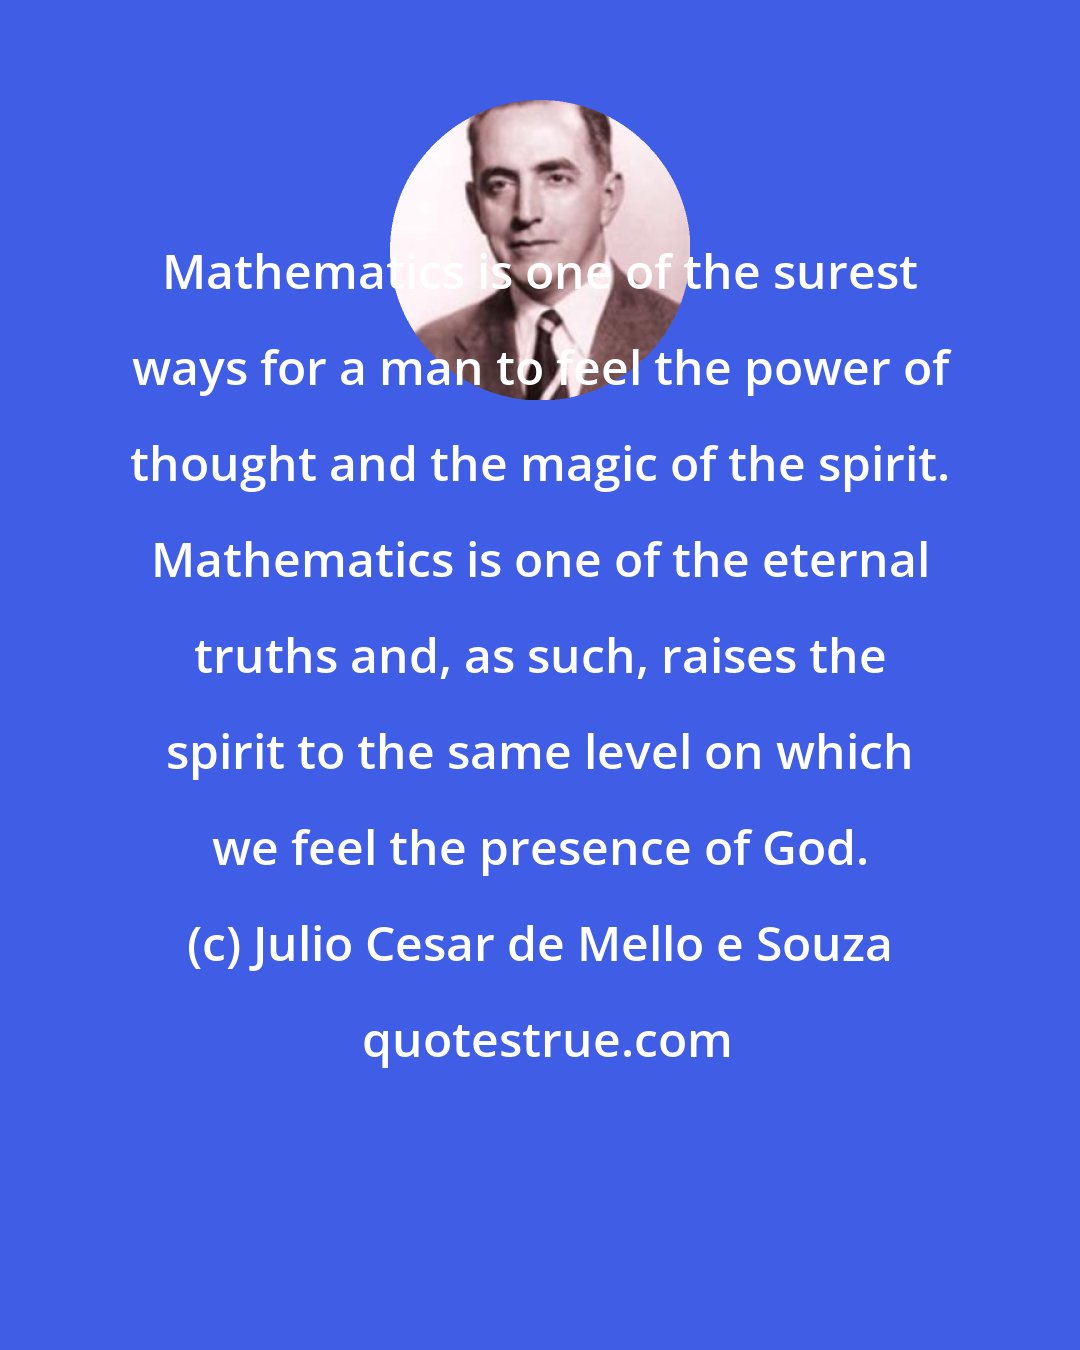 Julio Cesar de Mello e Souza: Mathematics is one of the surest ways for a man to feel the power of thought and the magic of the spirit. Mathematics is one of the eternal truths and, as such, raises the spirit to the same level on which we feel the presence of God.